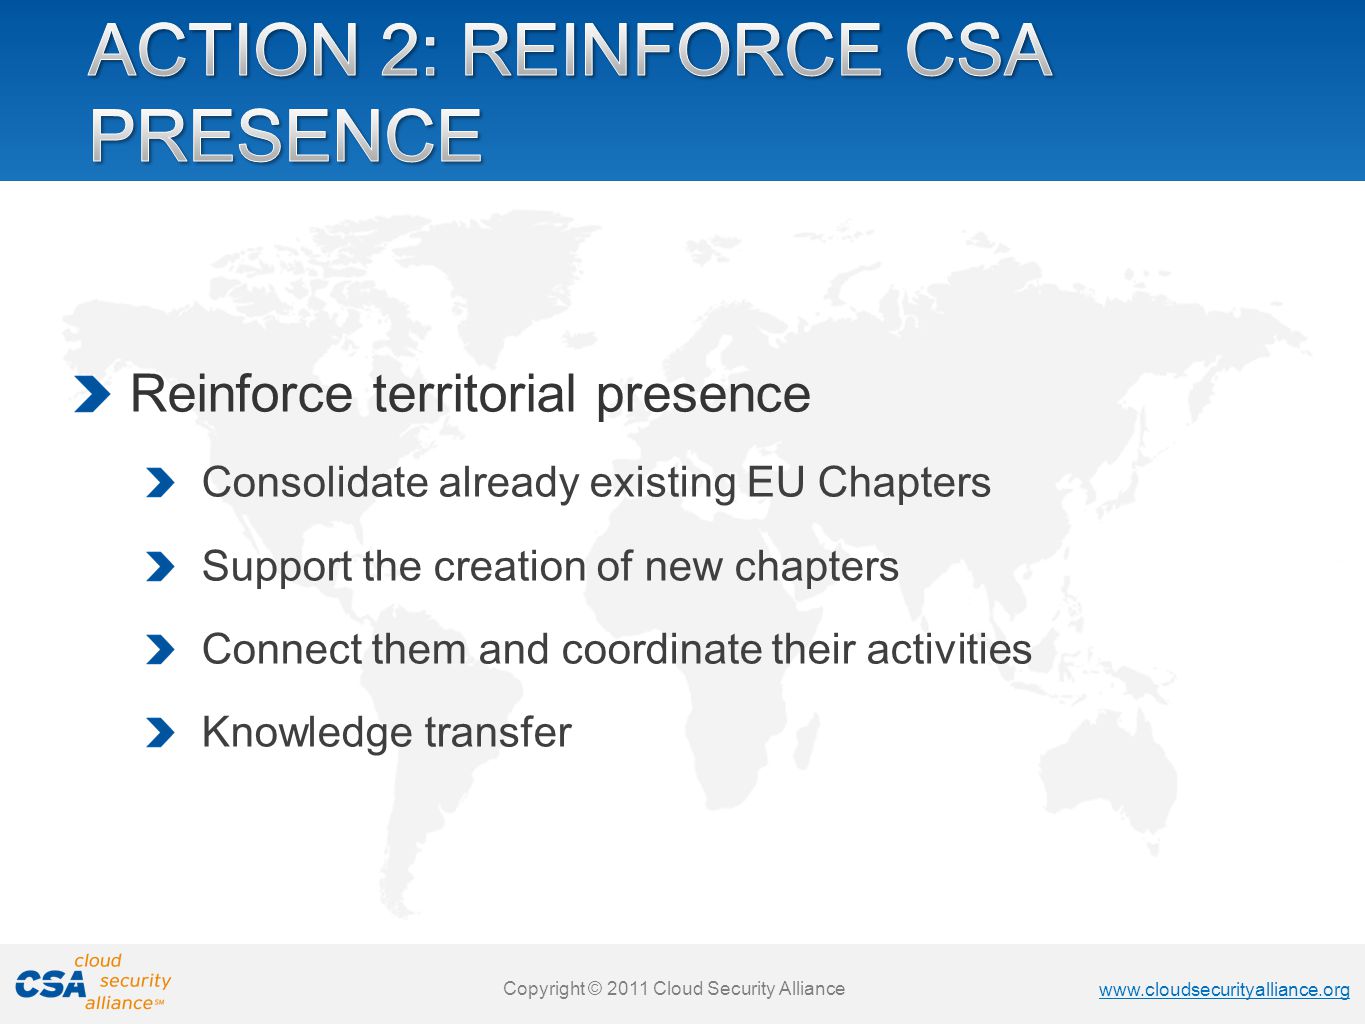 Copyright © 2011 Cloud Security Alliance   Copyright © 2011 Cloud Security Alliance   Copyright © 2011 Cloud Security Alliance   Copyright © 2011 Cloud Security Alliance Reinforce territorial presence Consolidate already existing EU Chapters Support the creation of new chapters Connect them and coordinate their activities Knowledge transfer